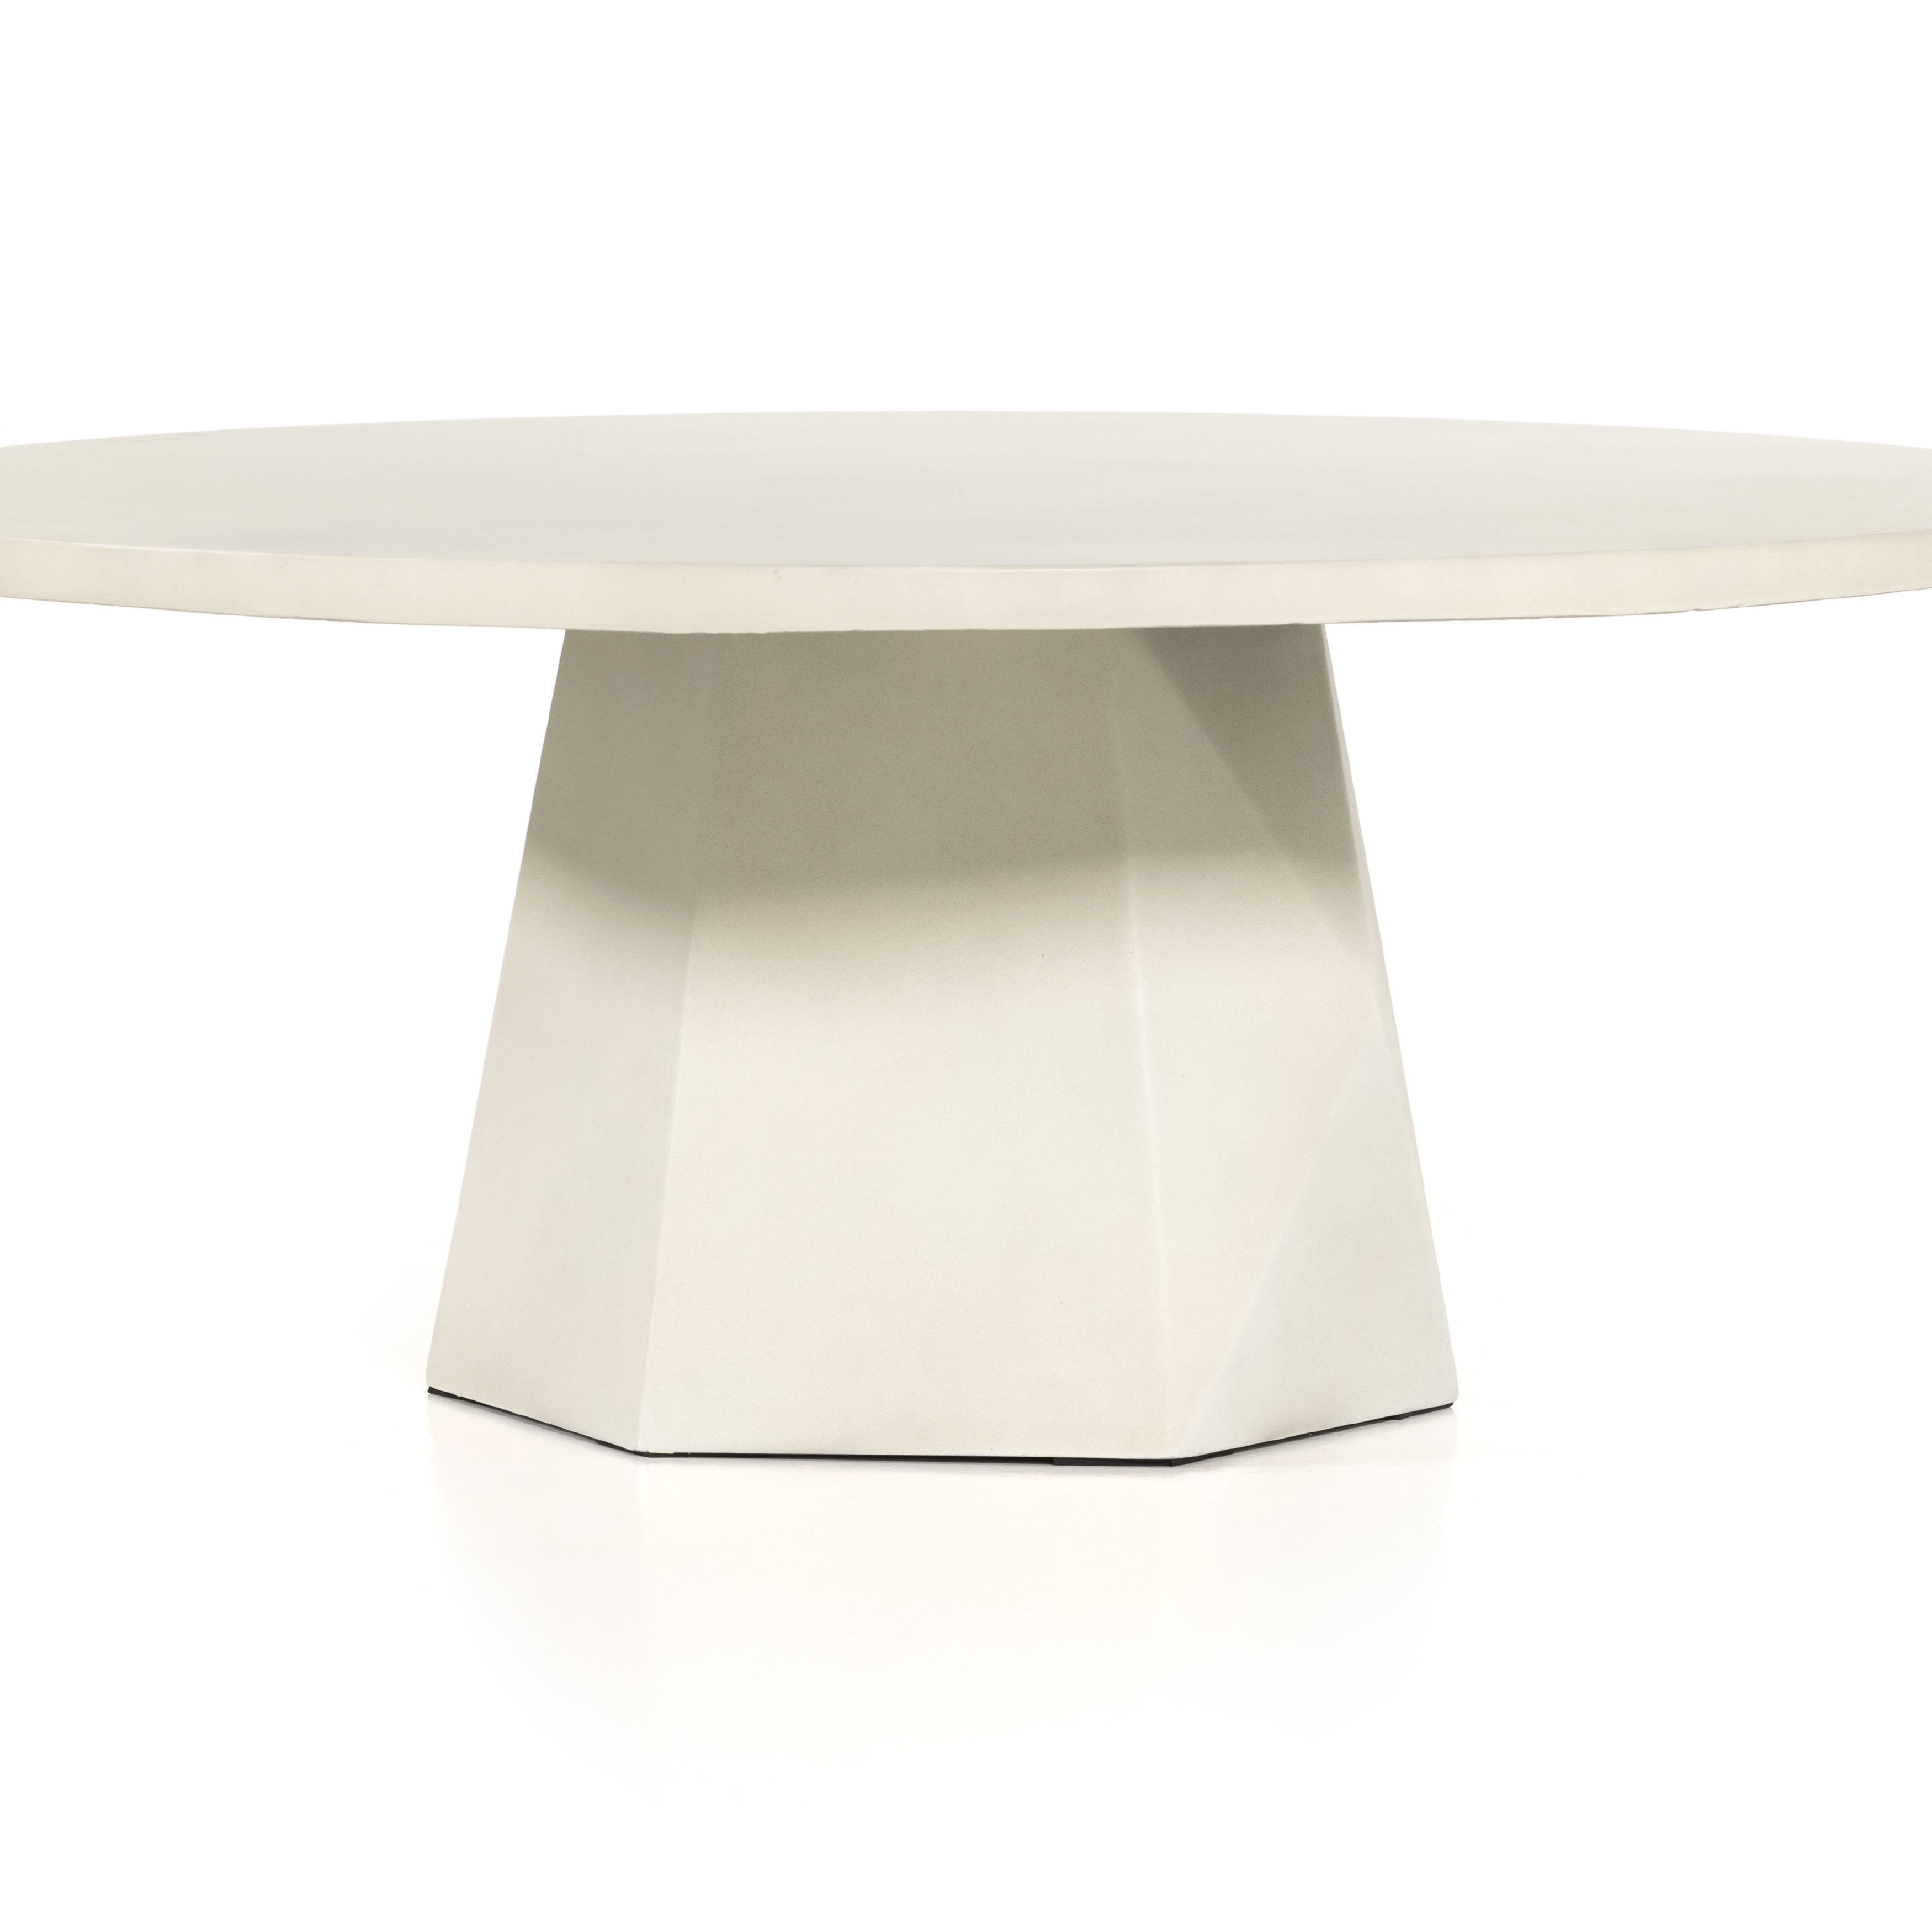 Bowman Outdoor Coffee Table-White Cncrt - Image 1